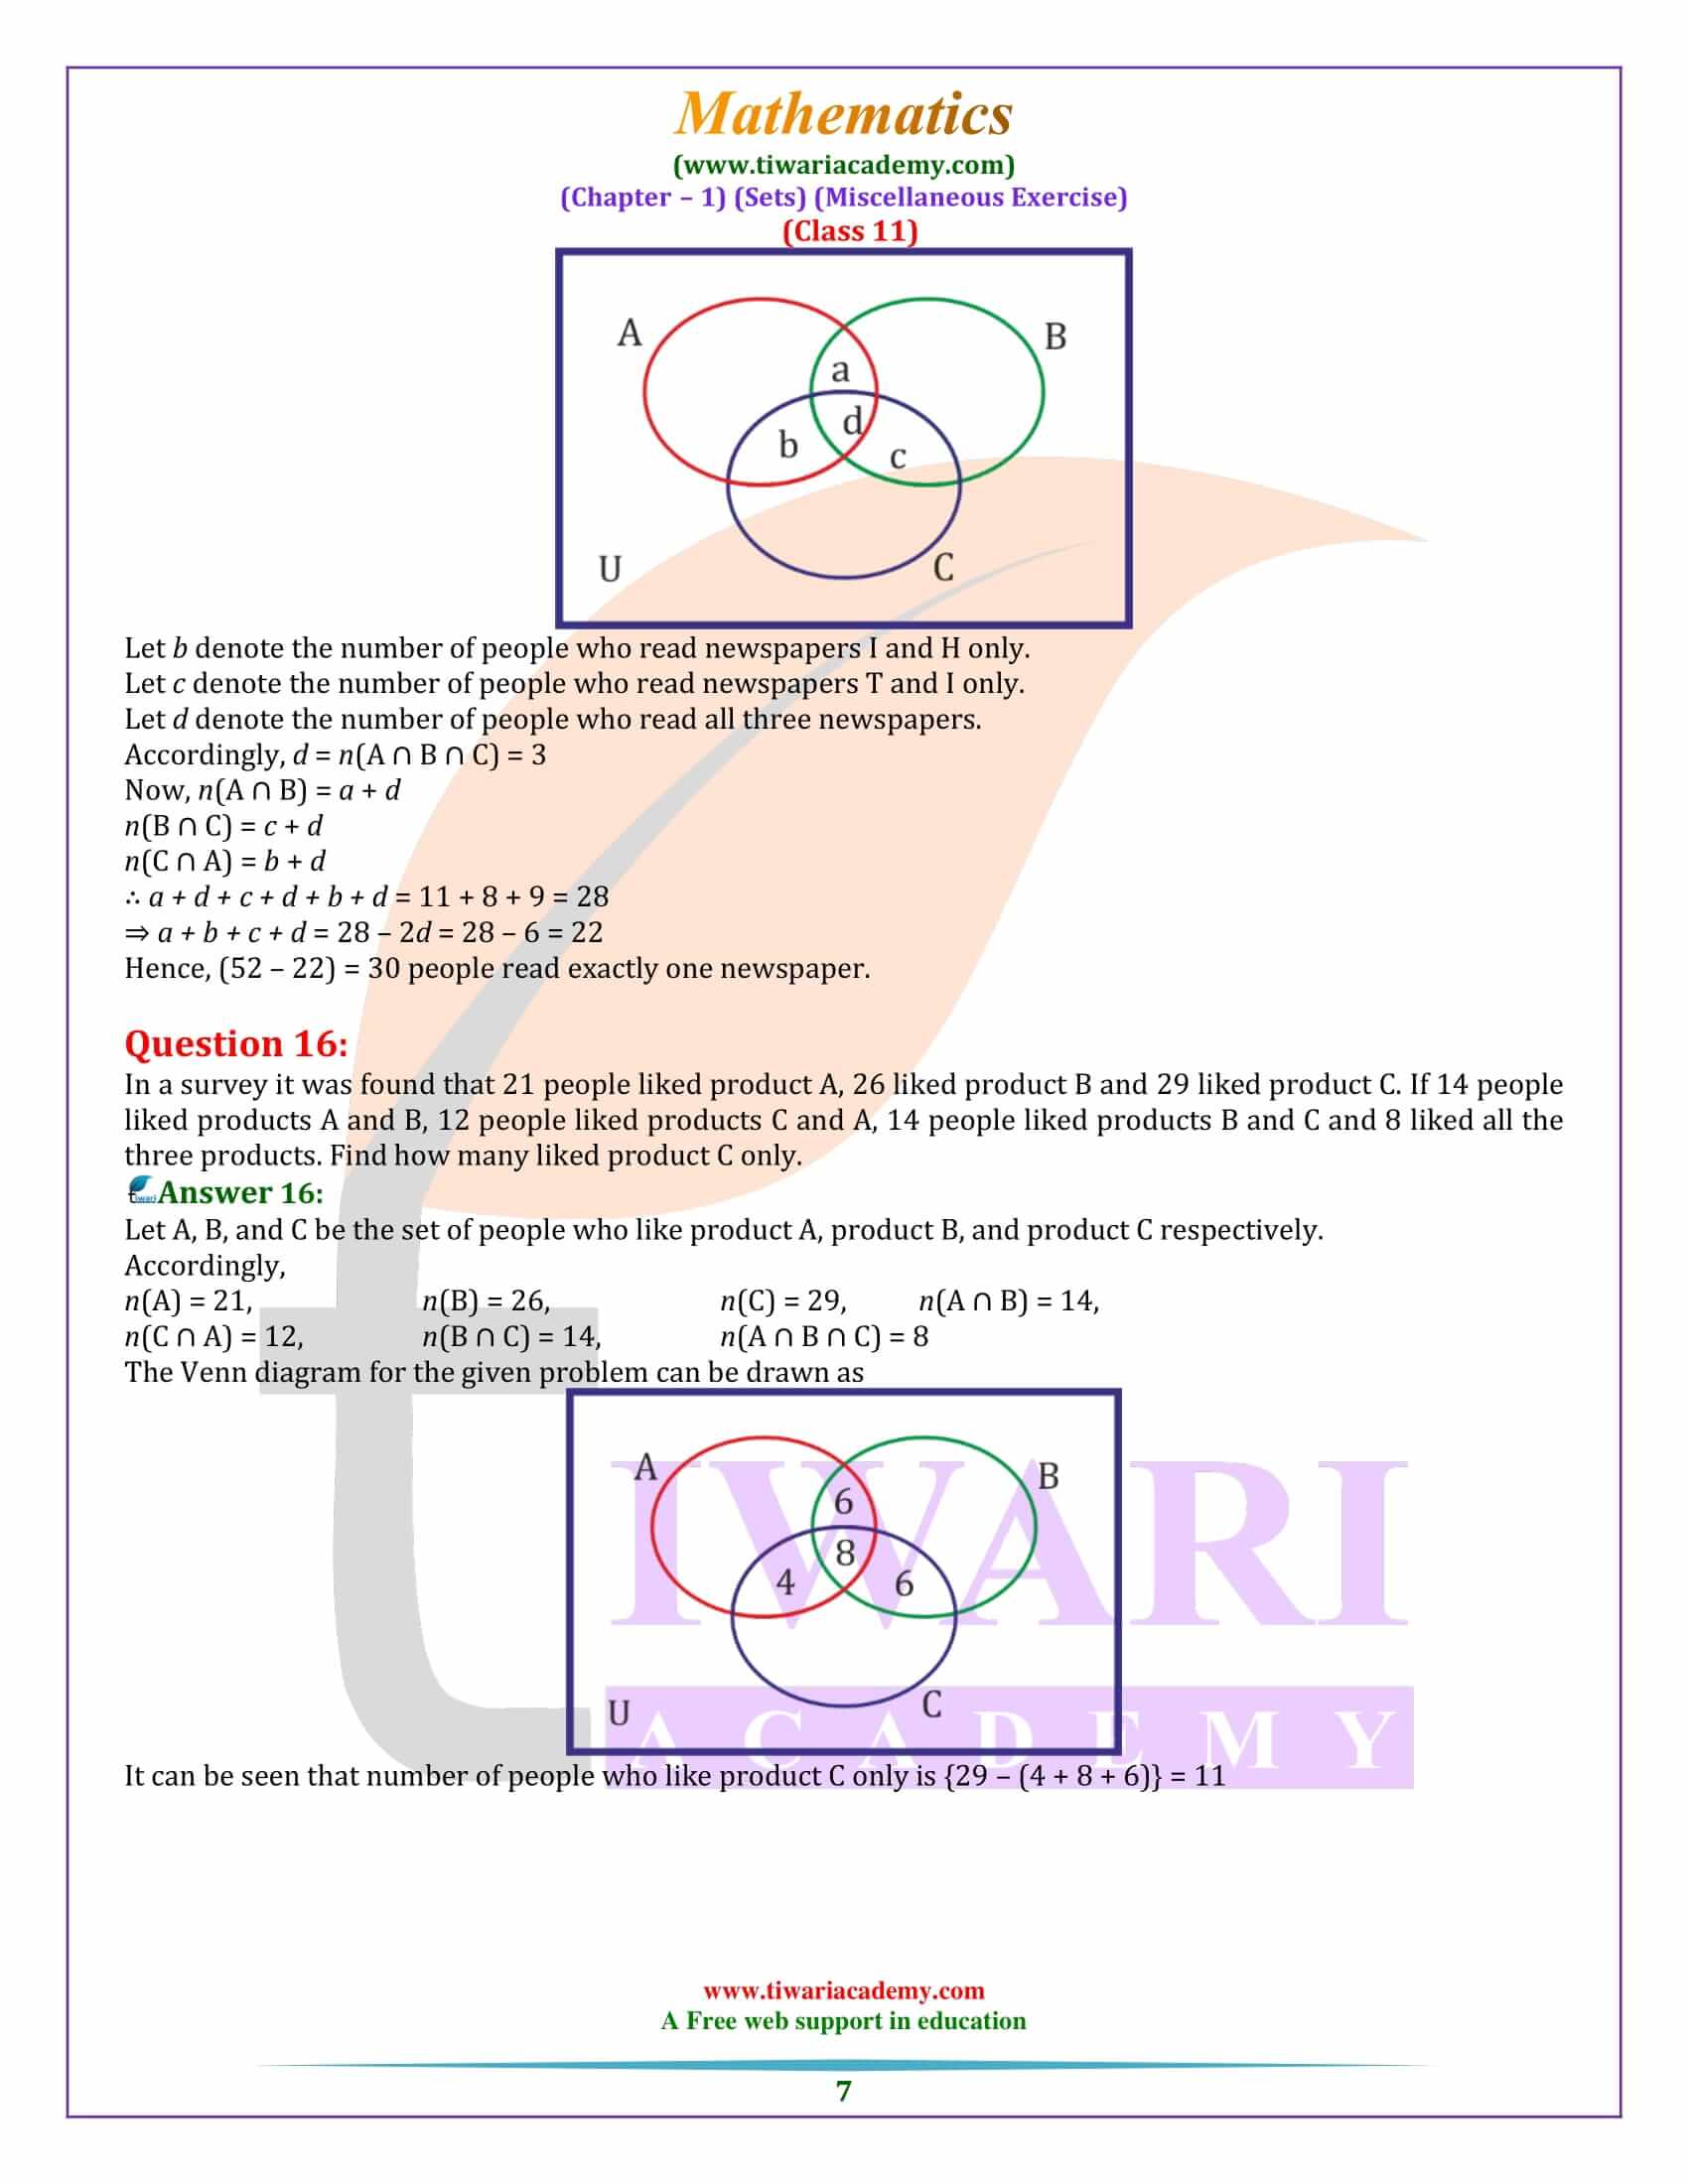 NCERT Solutions for Class 11 Maths Chapter 1 Miscellaneous Exercise free download